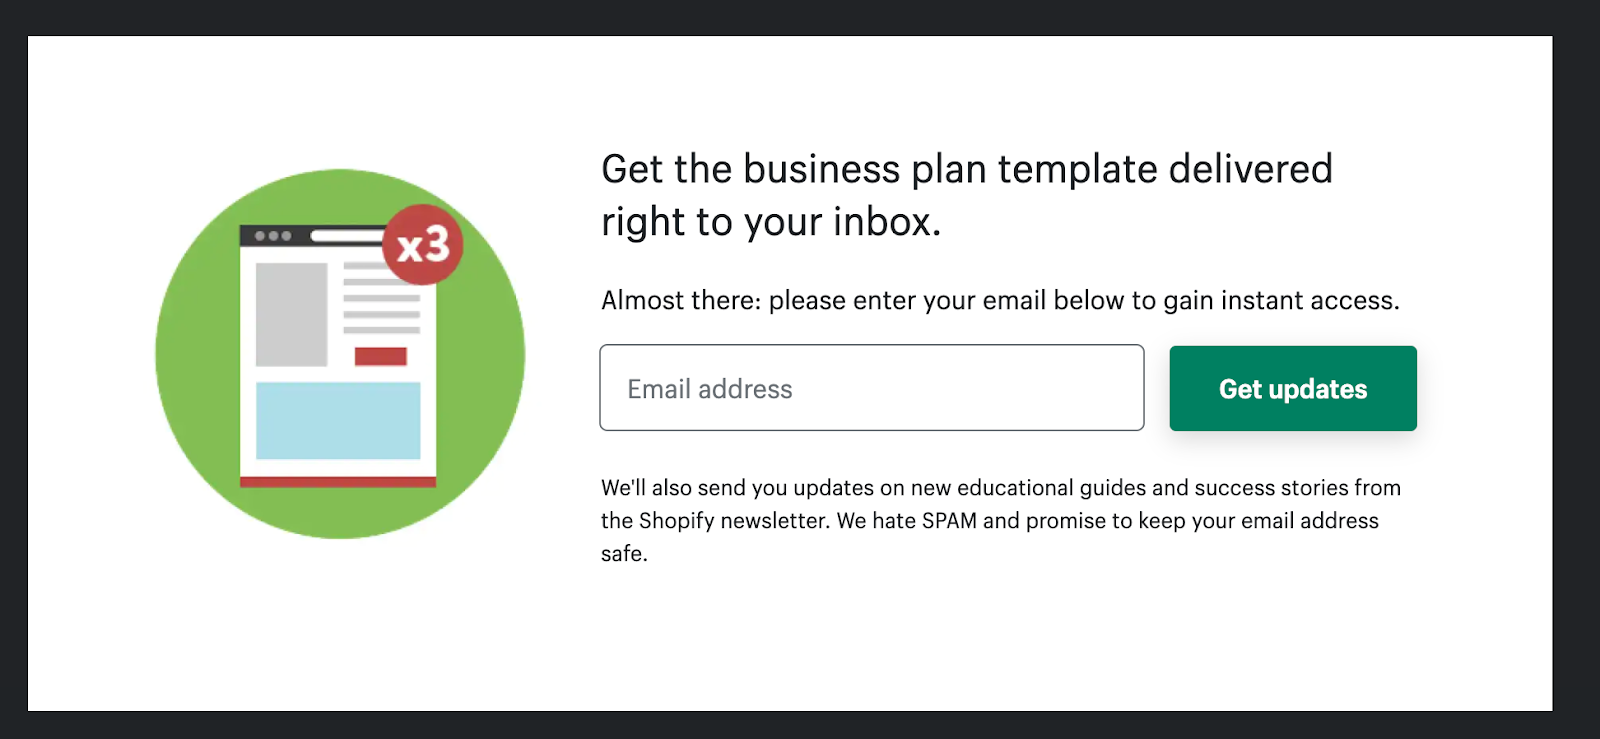 Shopify's "Get the business plan template delivered right to your inbox." message